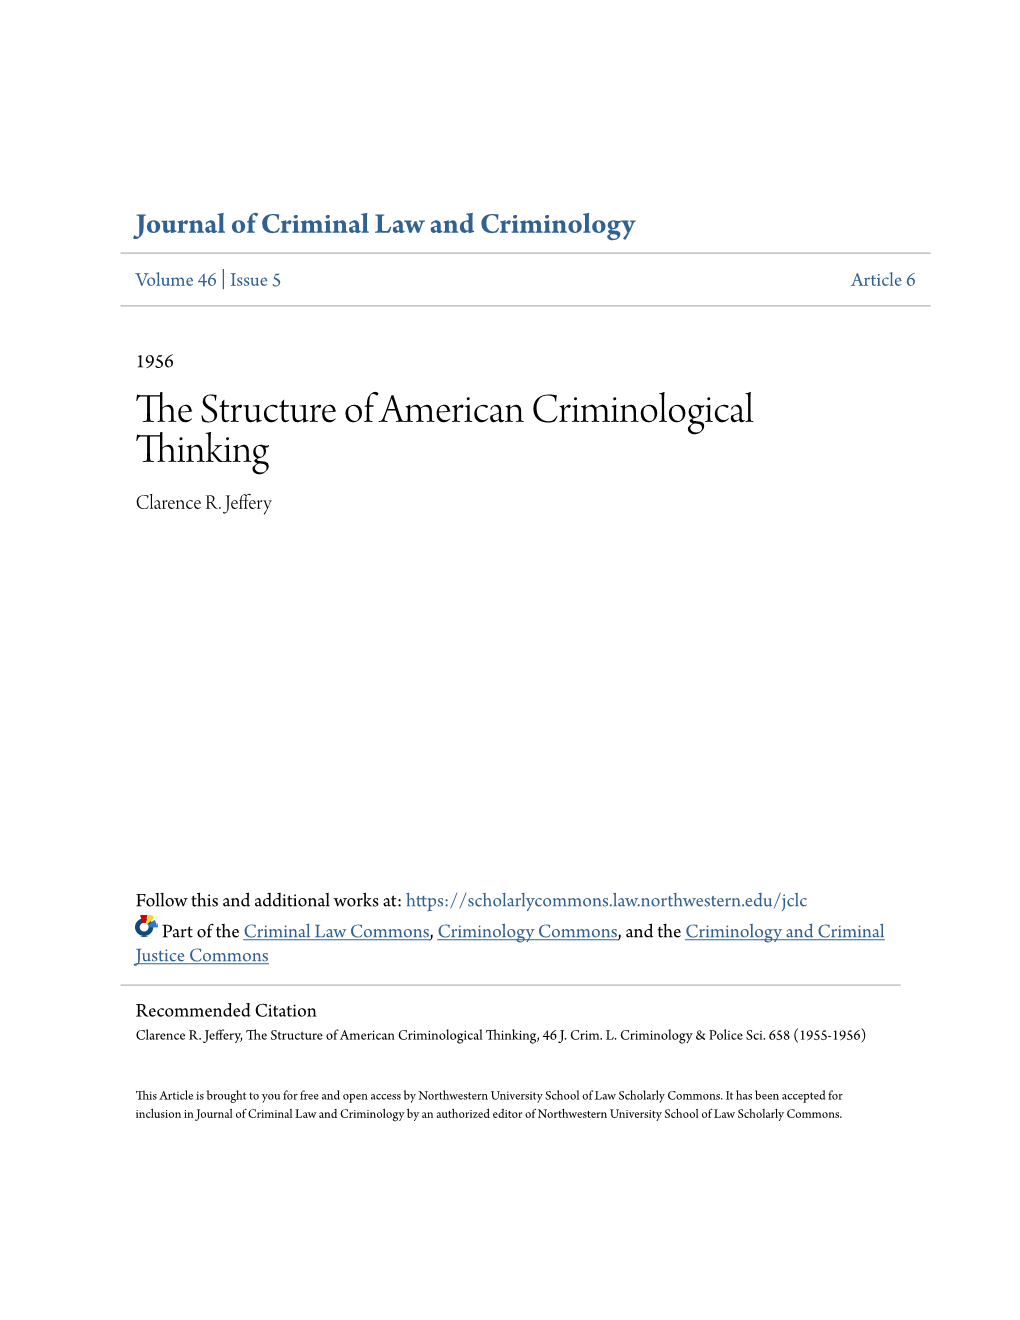 The Structure of American Criminological Thinking